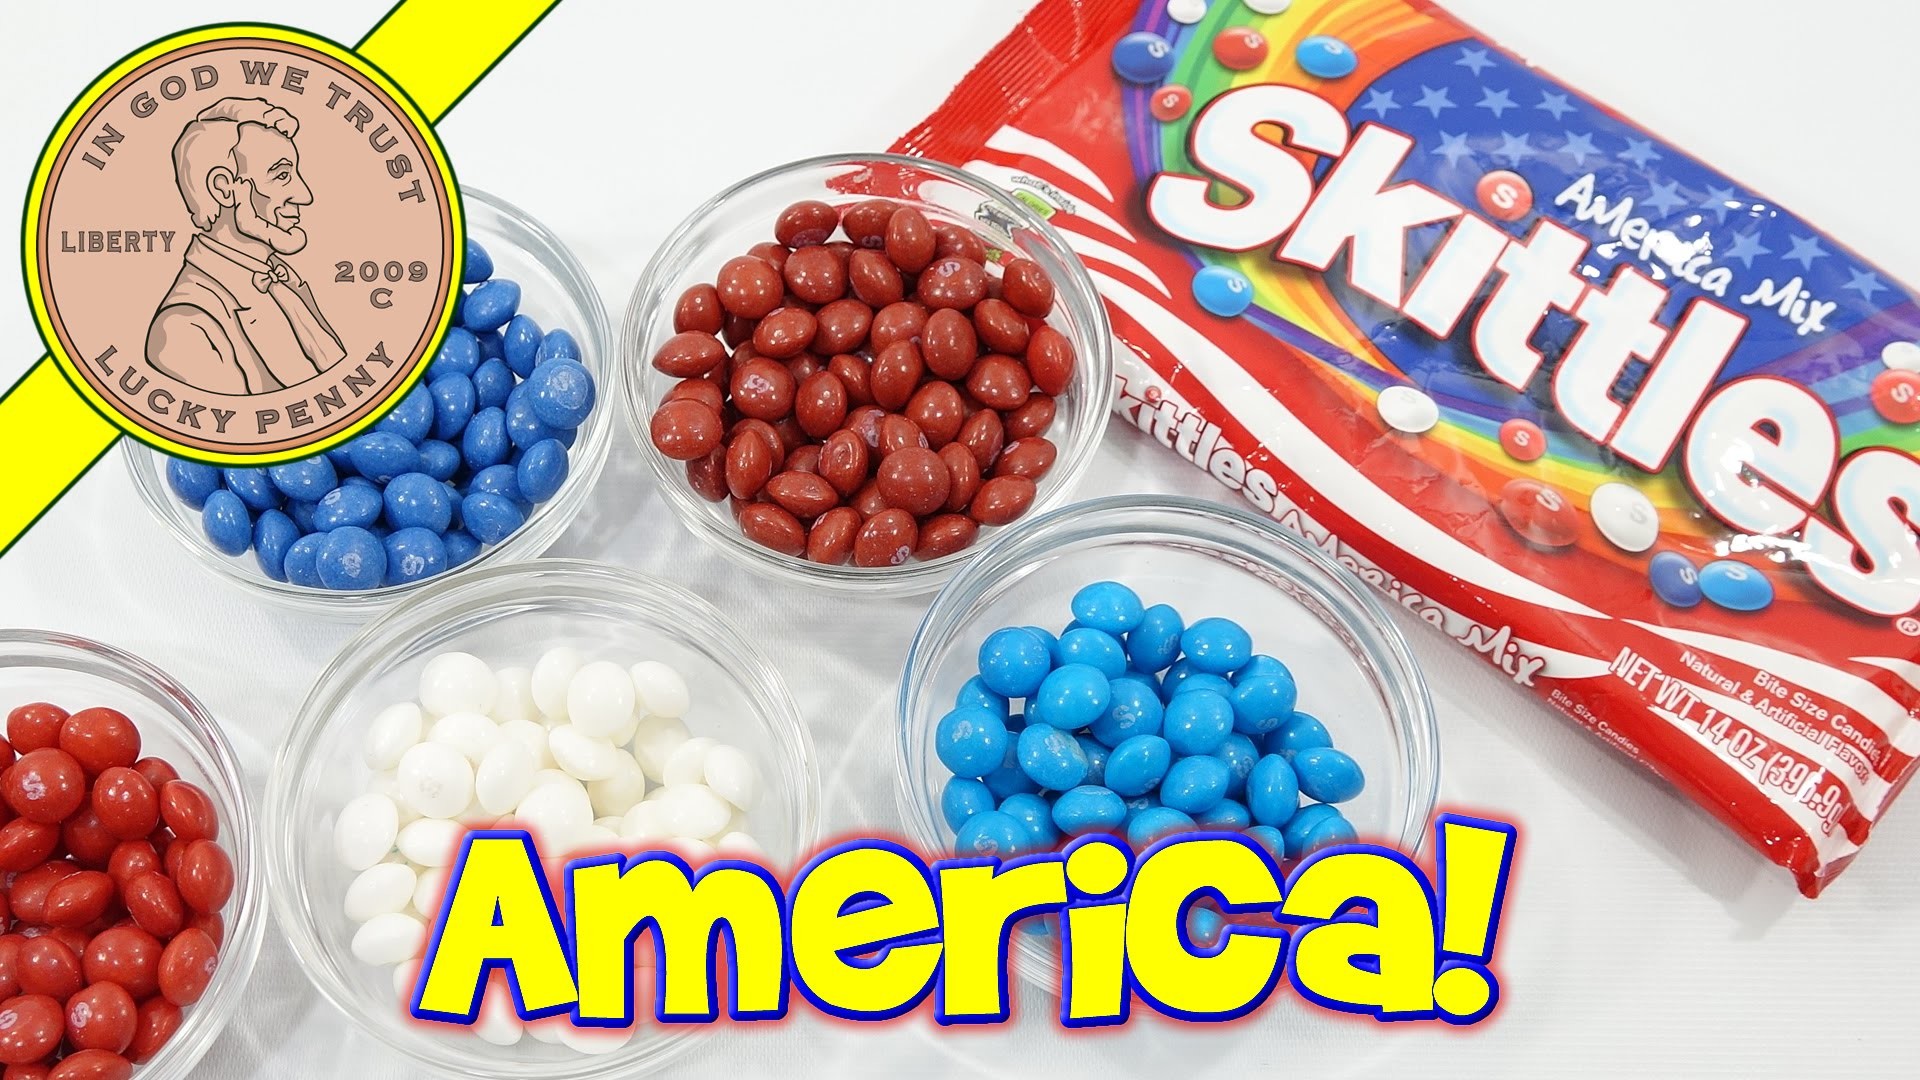 1920x1080 America Mix Skittles 4th Of July Red White & Blue Candy